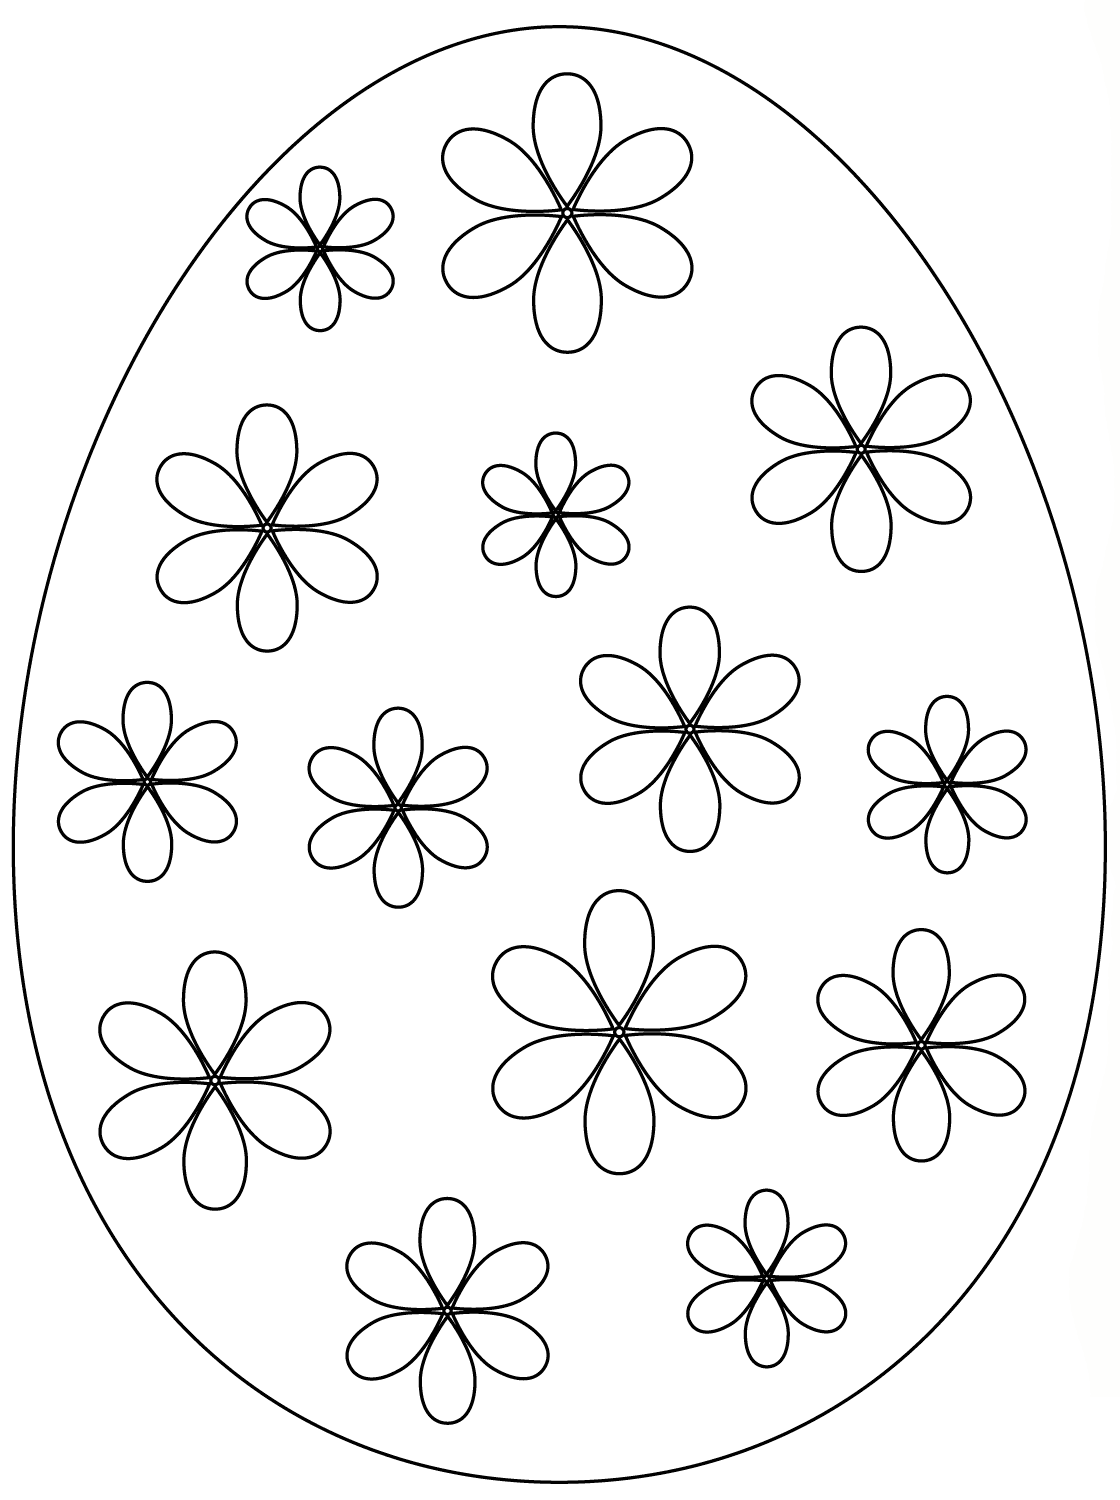 Easter Egg With Flowers Coloring Page